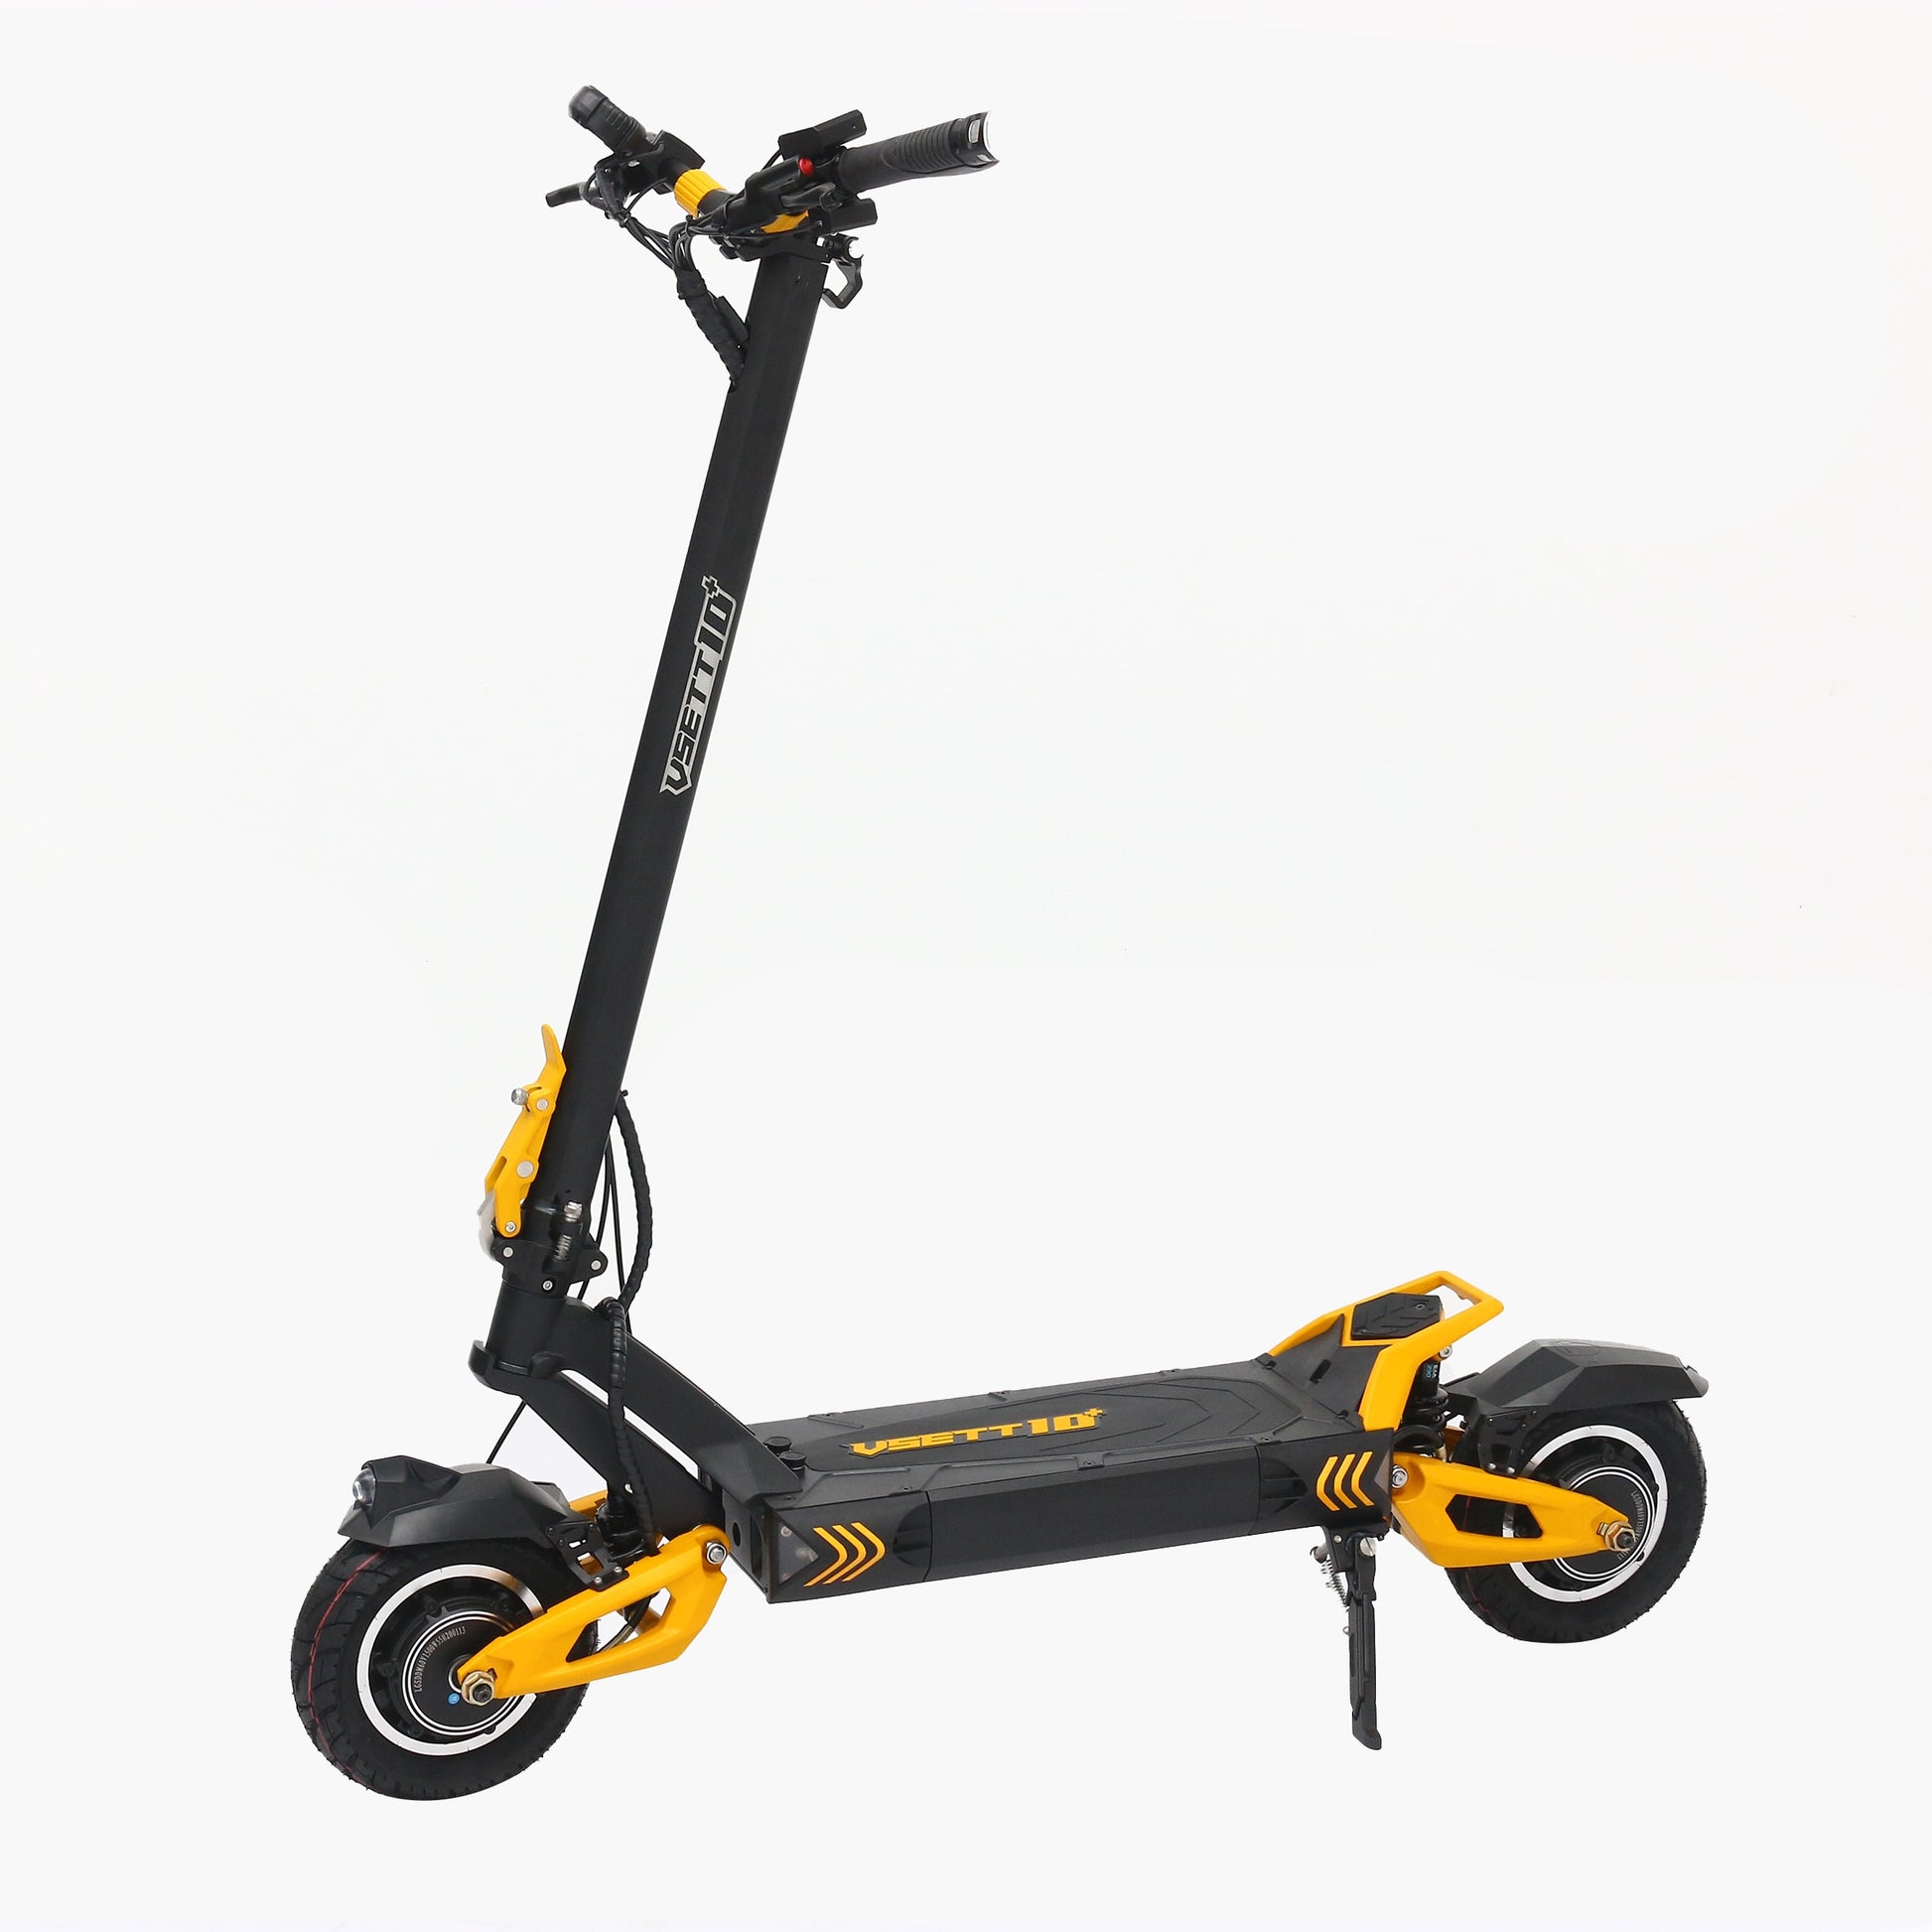 VSETT 10+ Electric Scooter yellow color